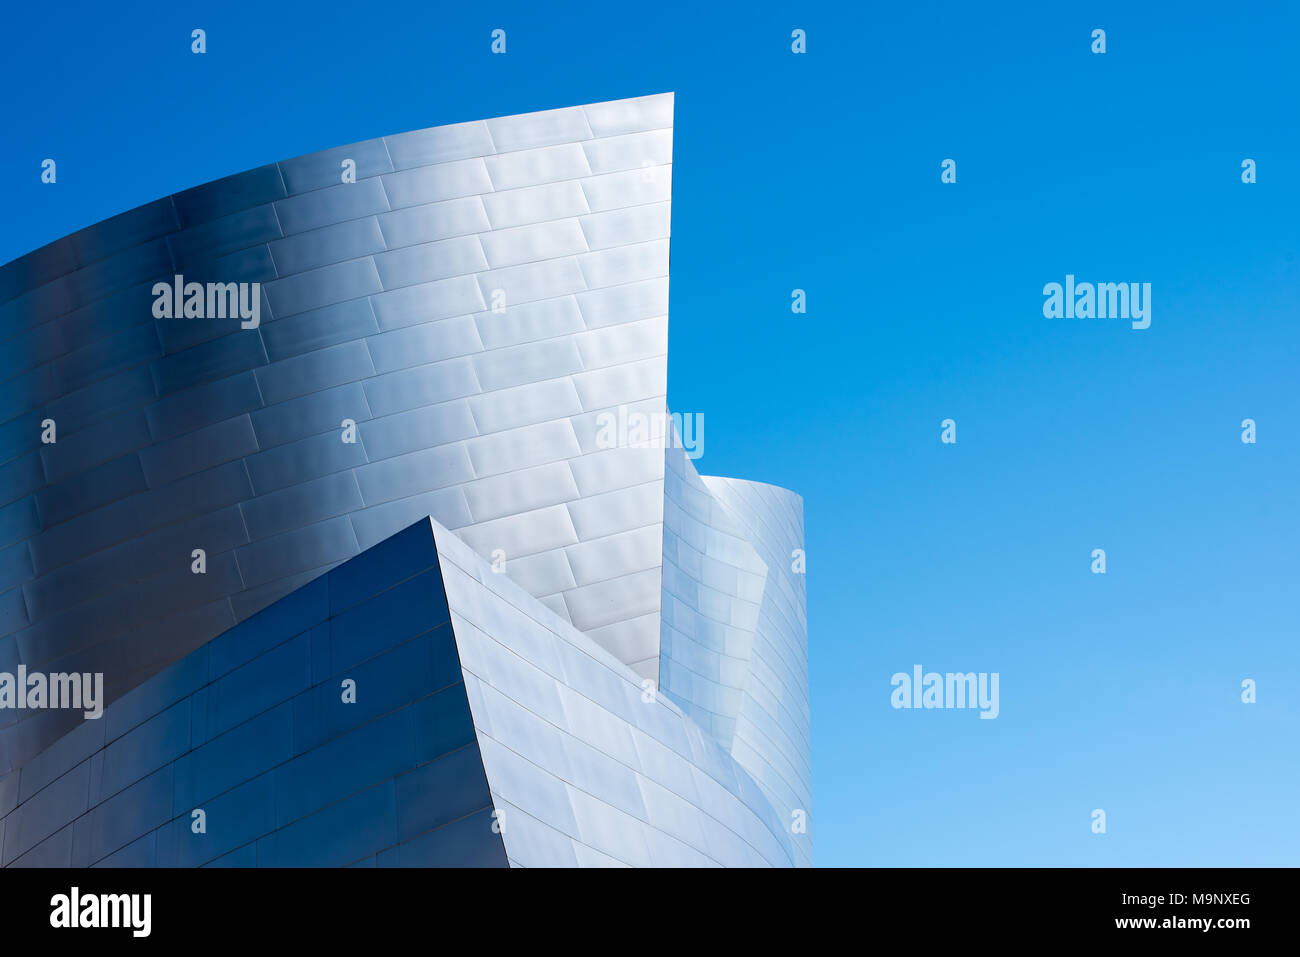 LOS ANGELES, CA - March 15, 2018: Walt Disney Concert Hall building detail in March 15, 2018 in Downtown of Los Angeles, CA Stock Photo